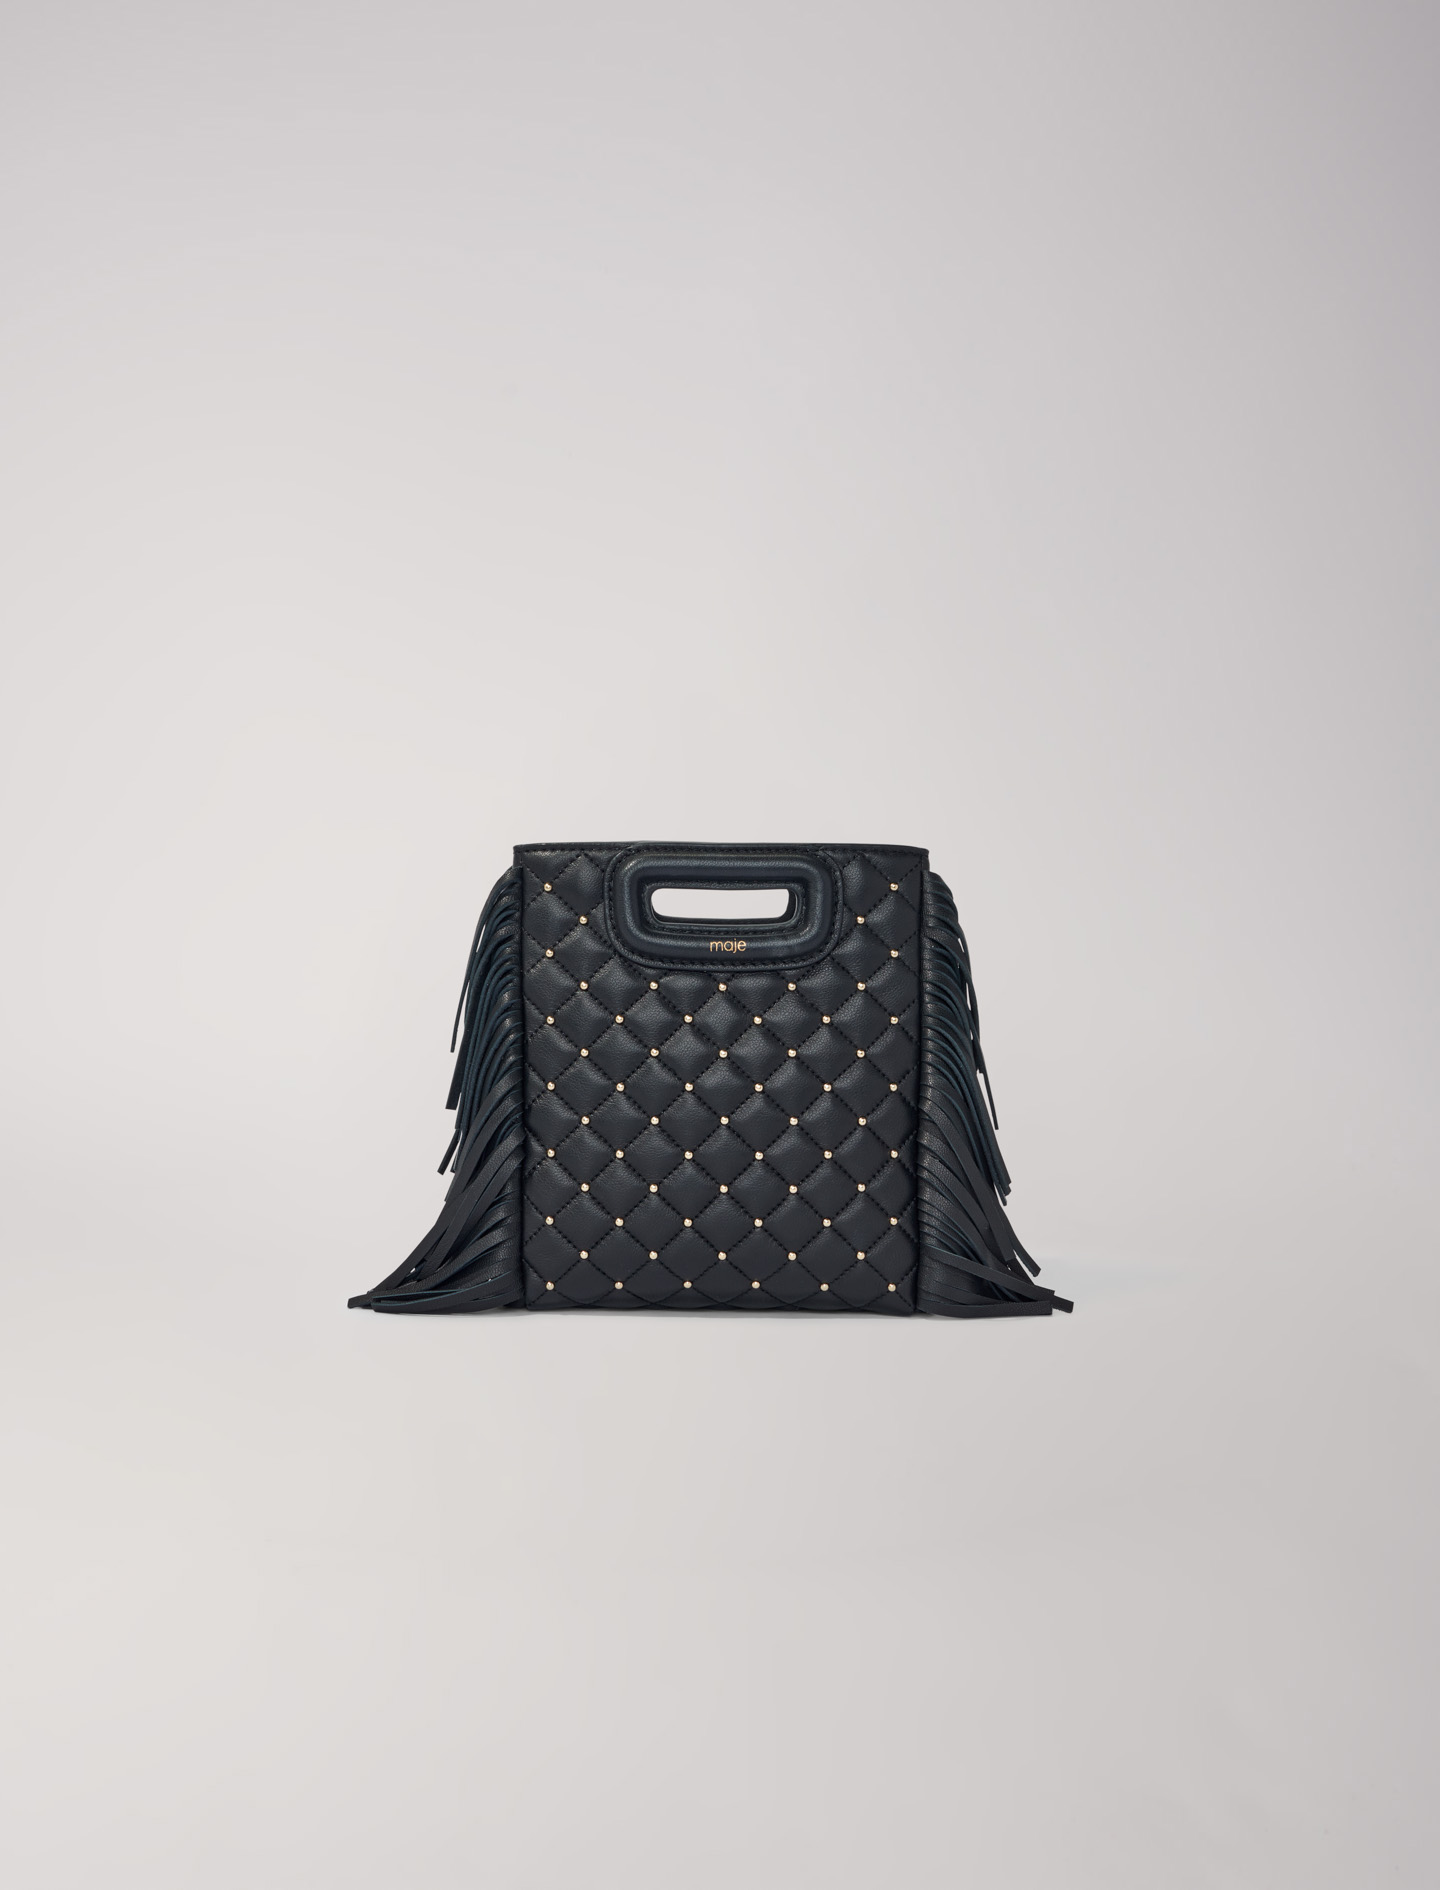 Mixte's polyester Rivet: Studded M quilted leather mini bag for Spring/Summer, size Mixte-All Bags-OS (ONE SIZE), in color Black / Black